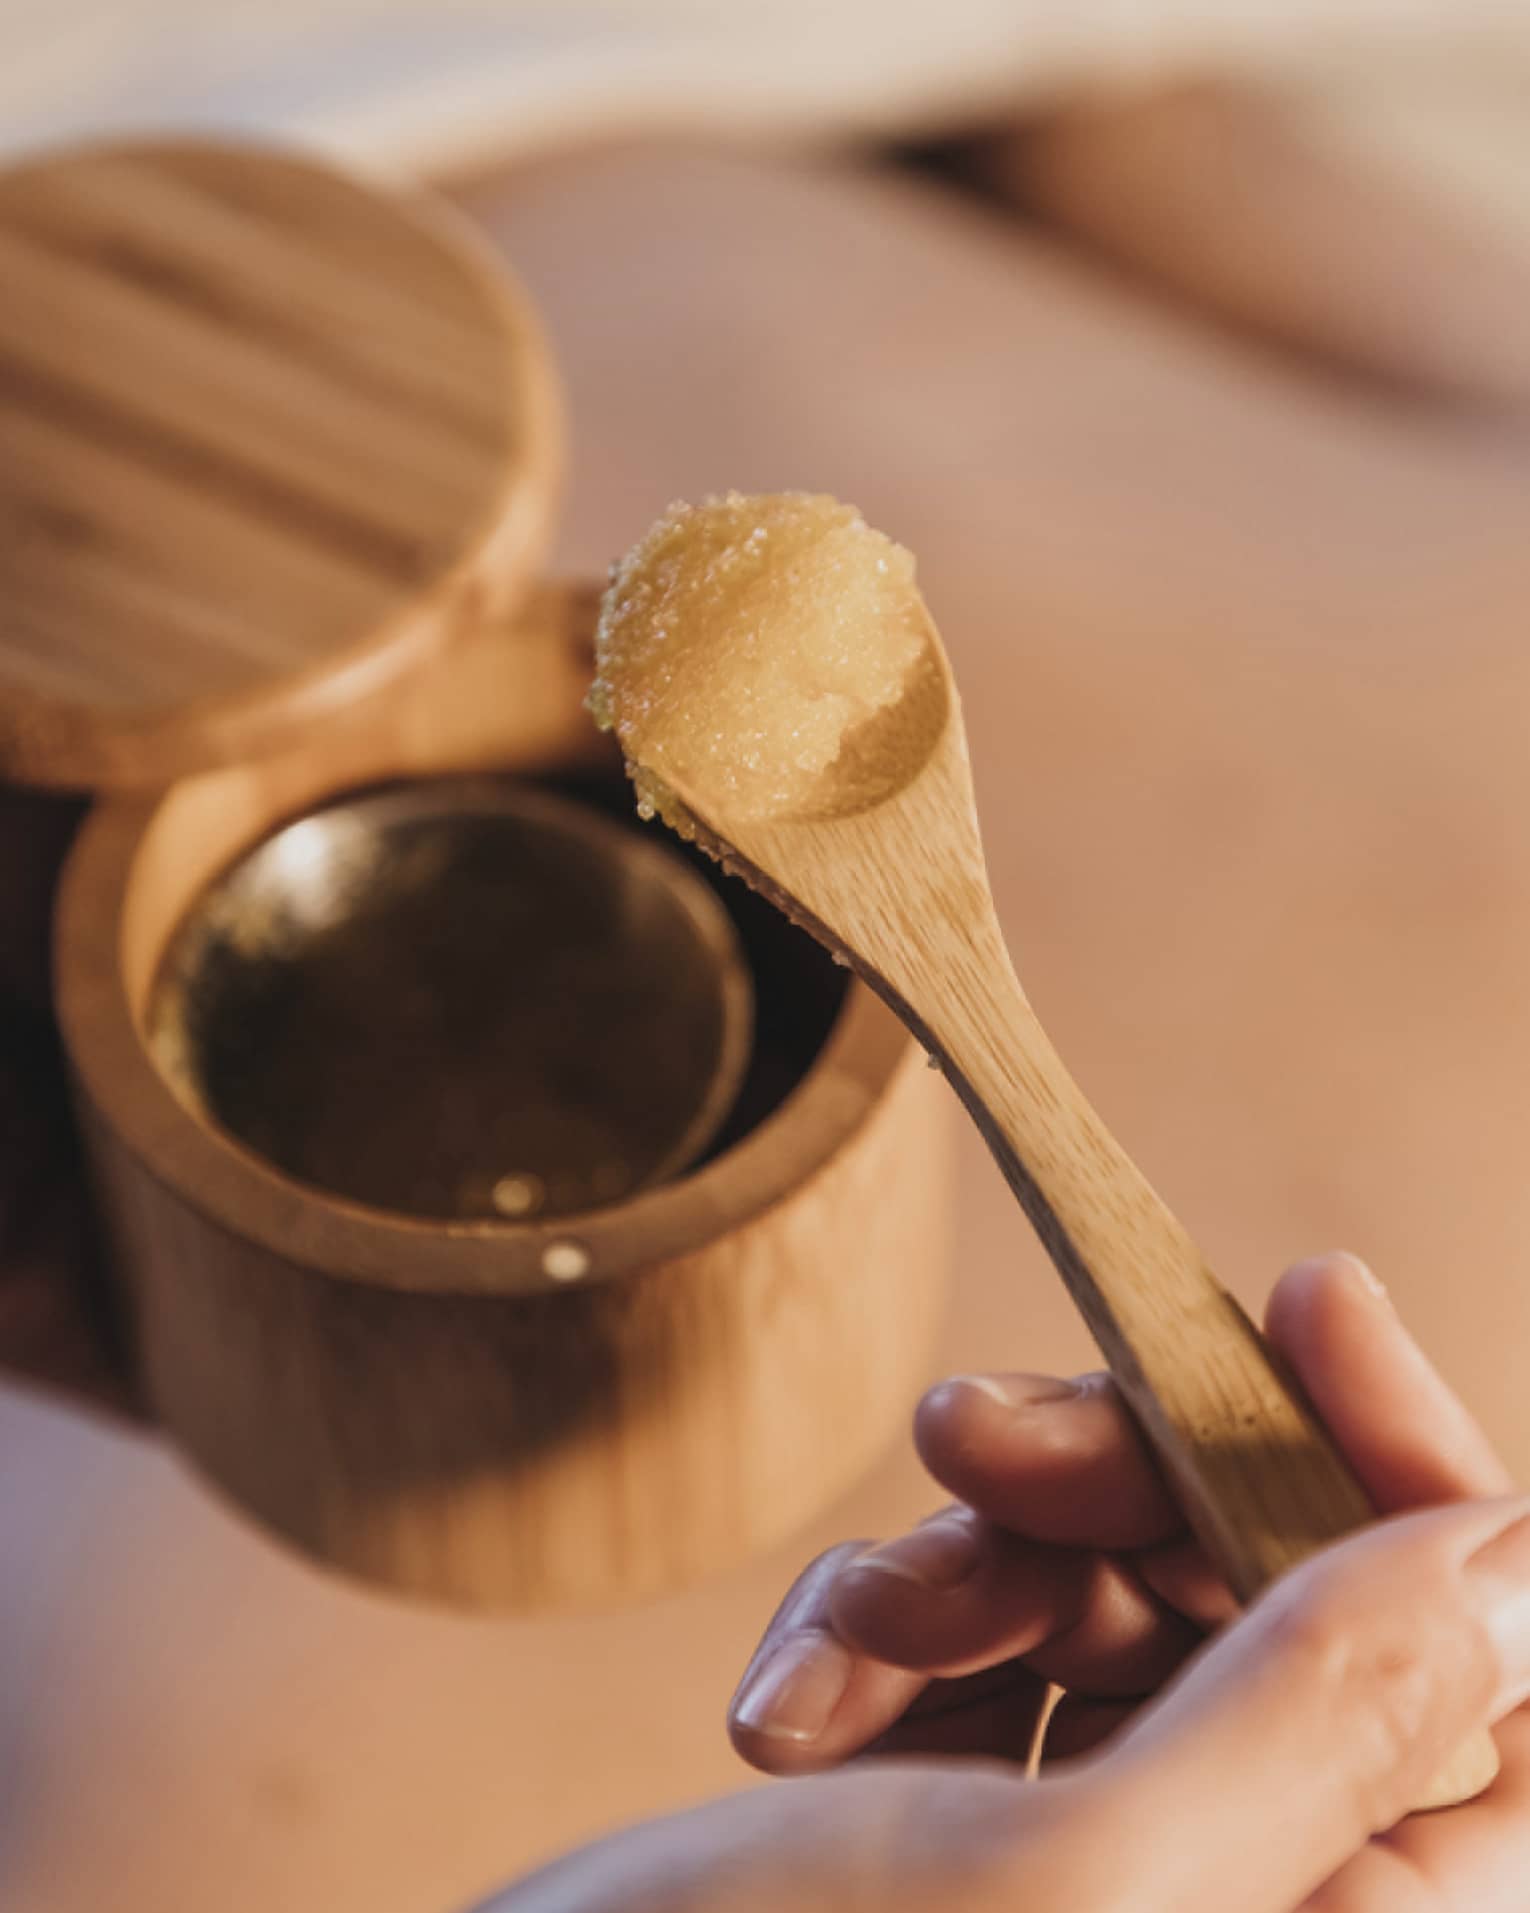 A spa member removing a spa treatment ingredient from a wooden cup with a spoon.